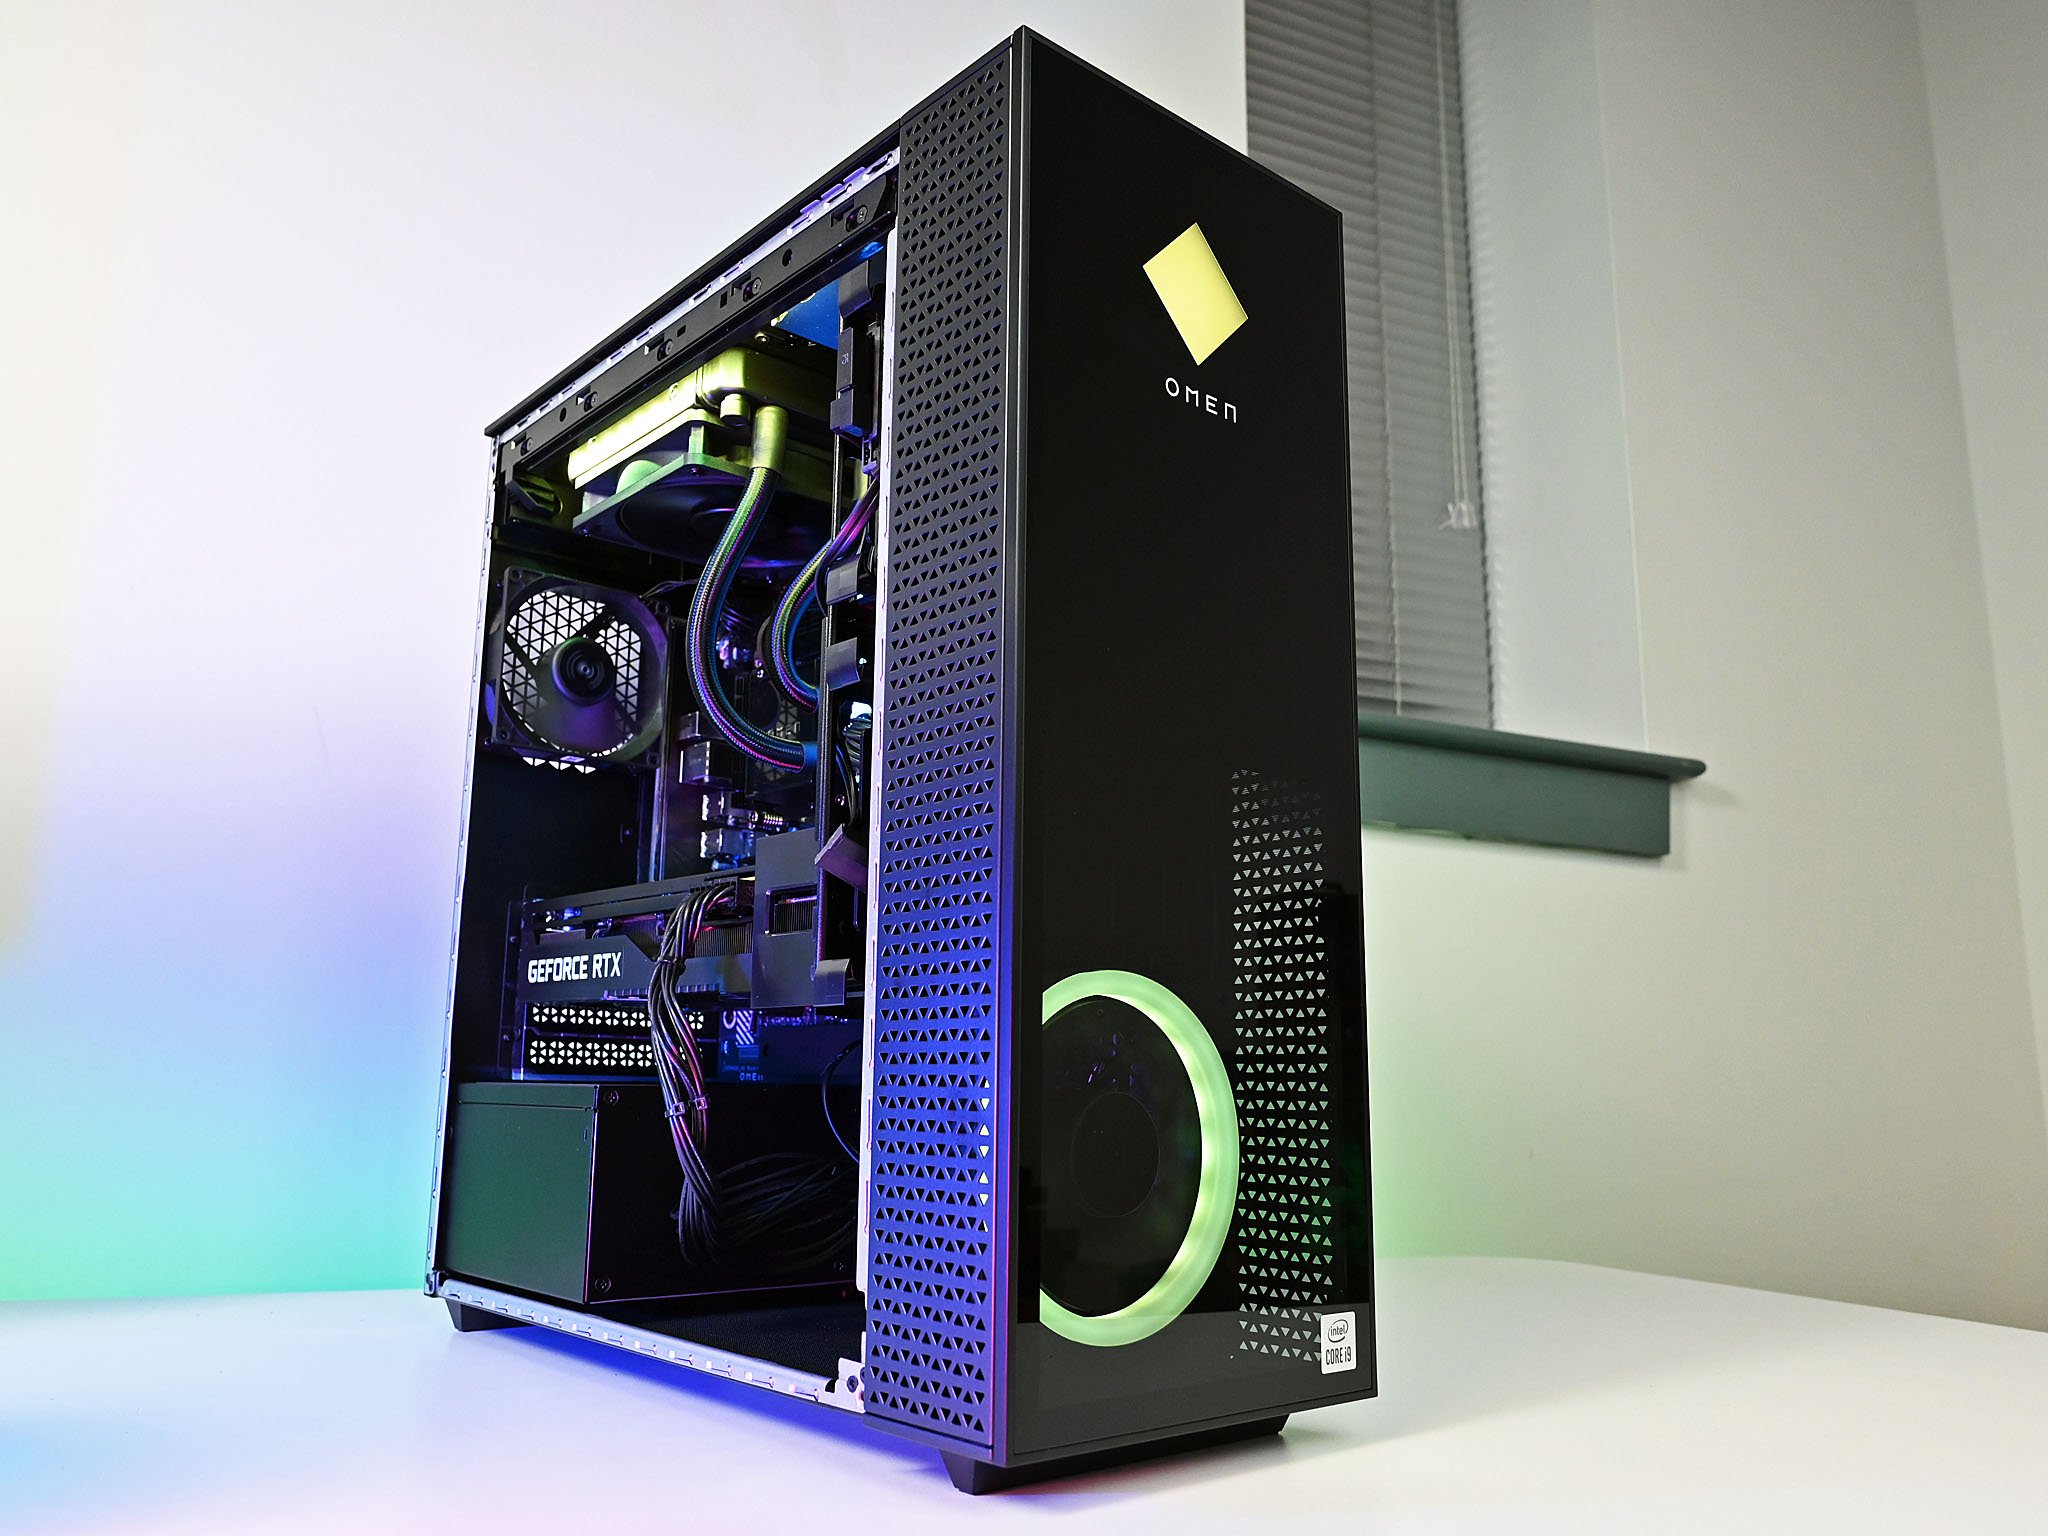 Get a deal on a pre-built gaming desktop PC thanks to Black Friday